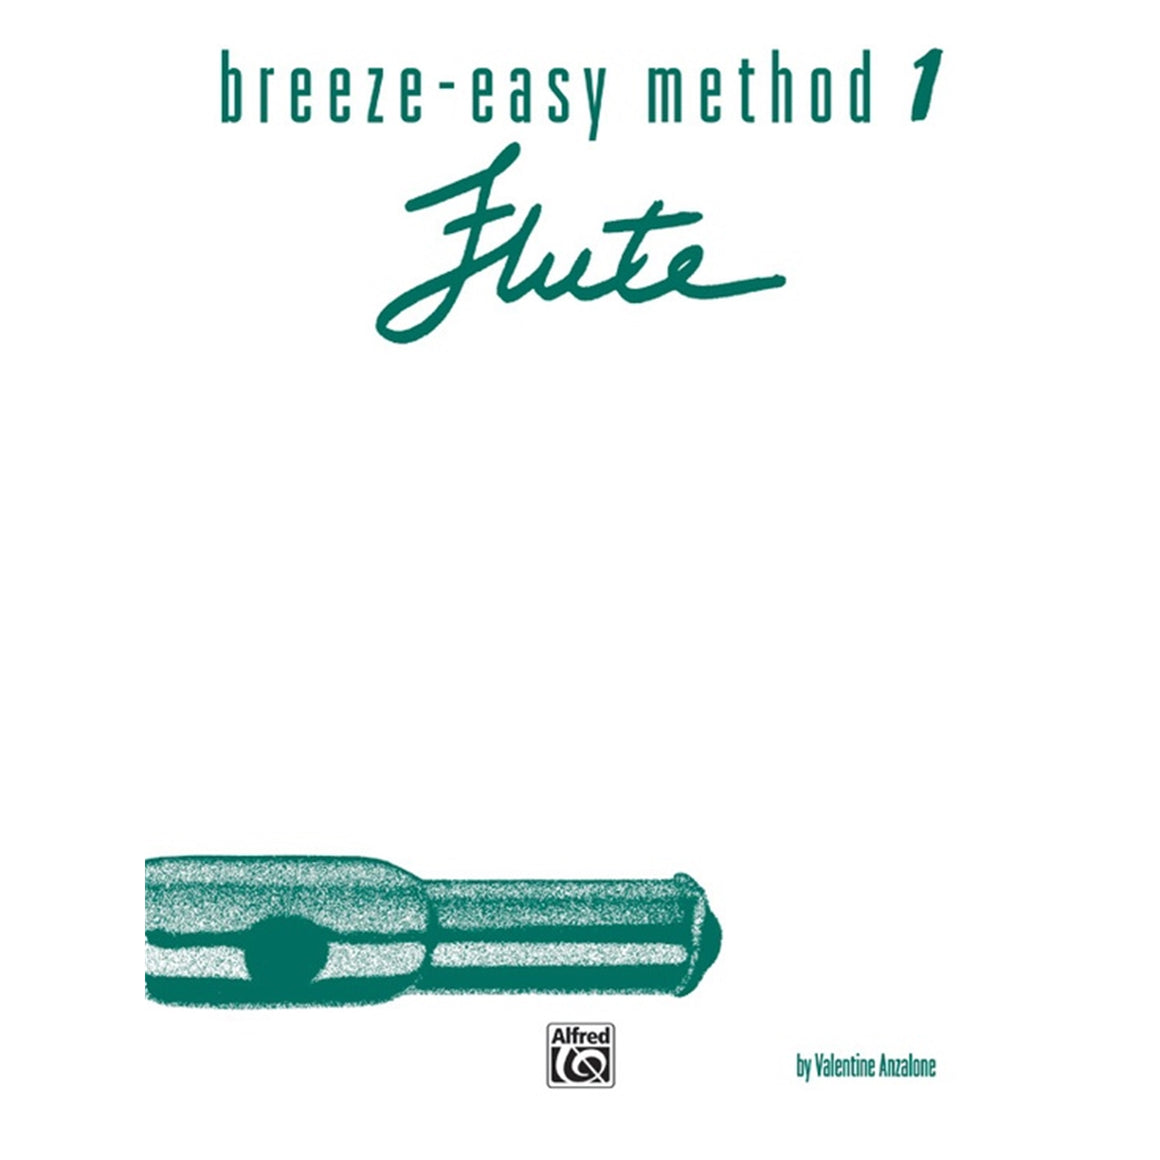 ALFRED 00BE0007 Breeze-Easy Method for Flute, Book I